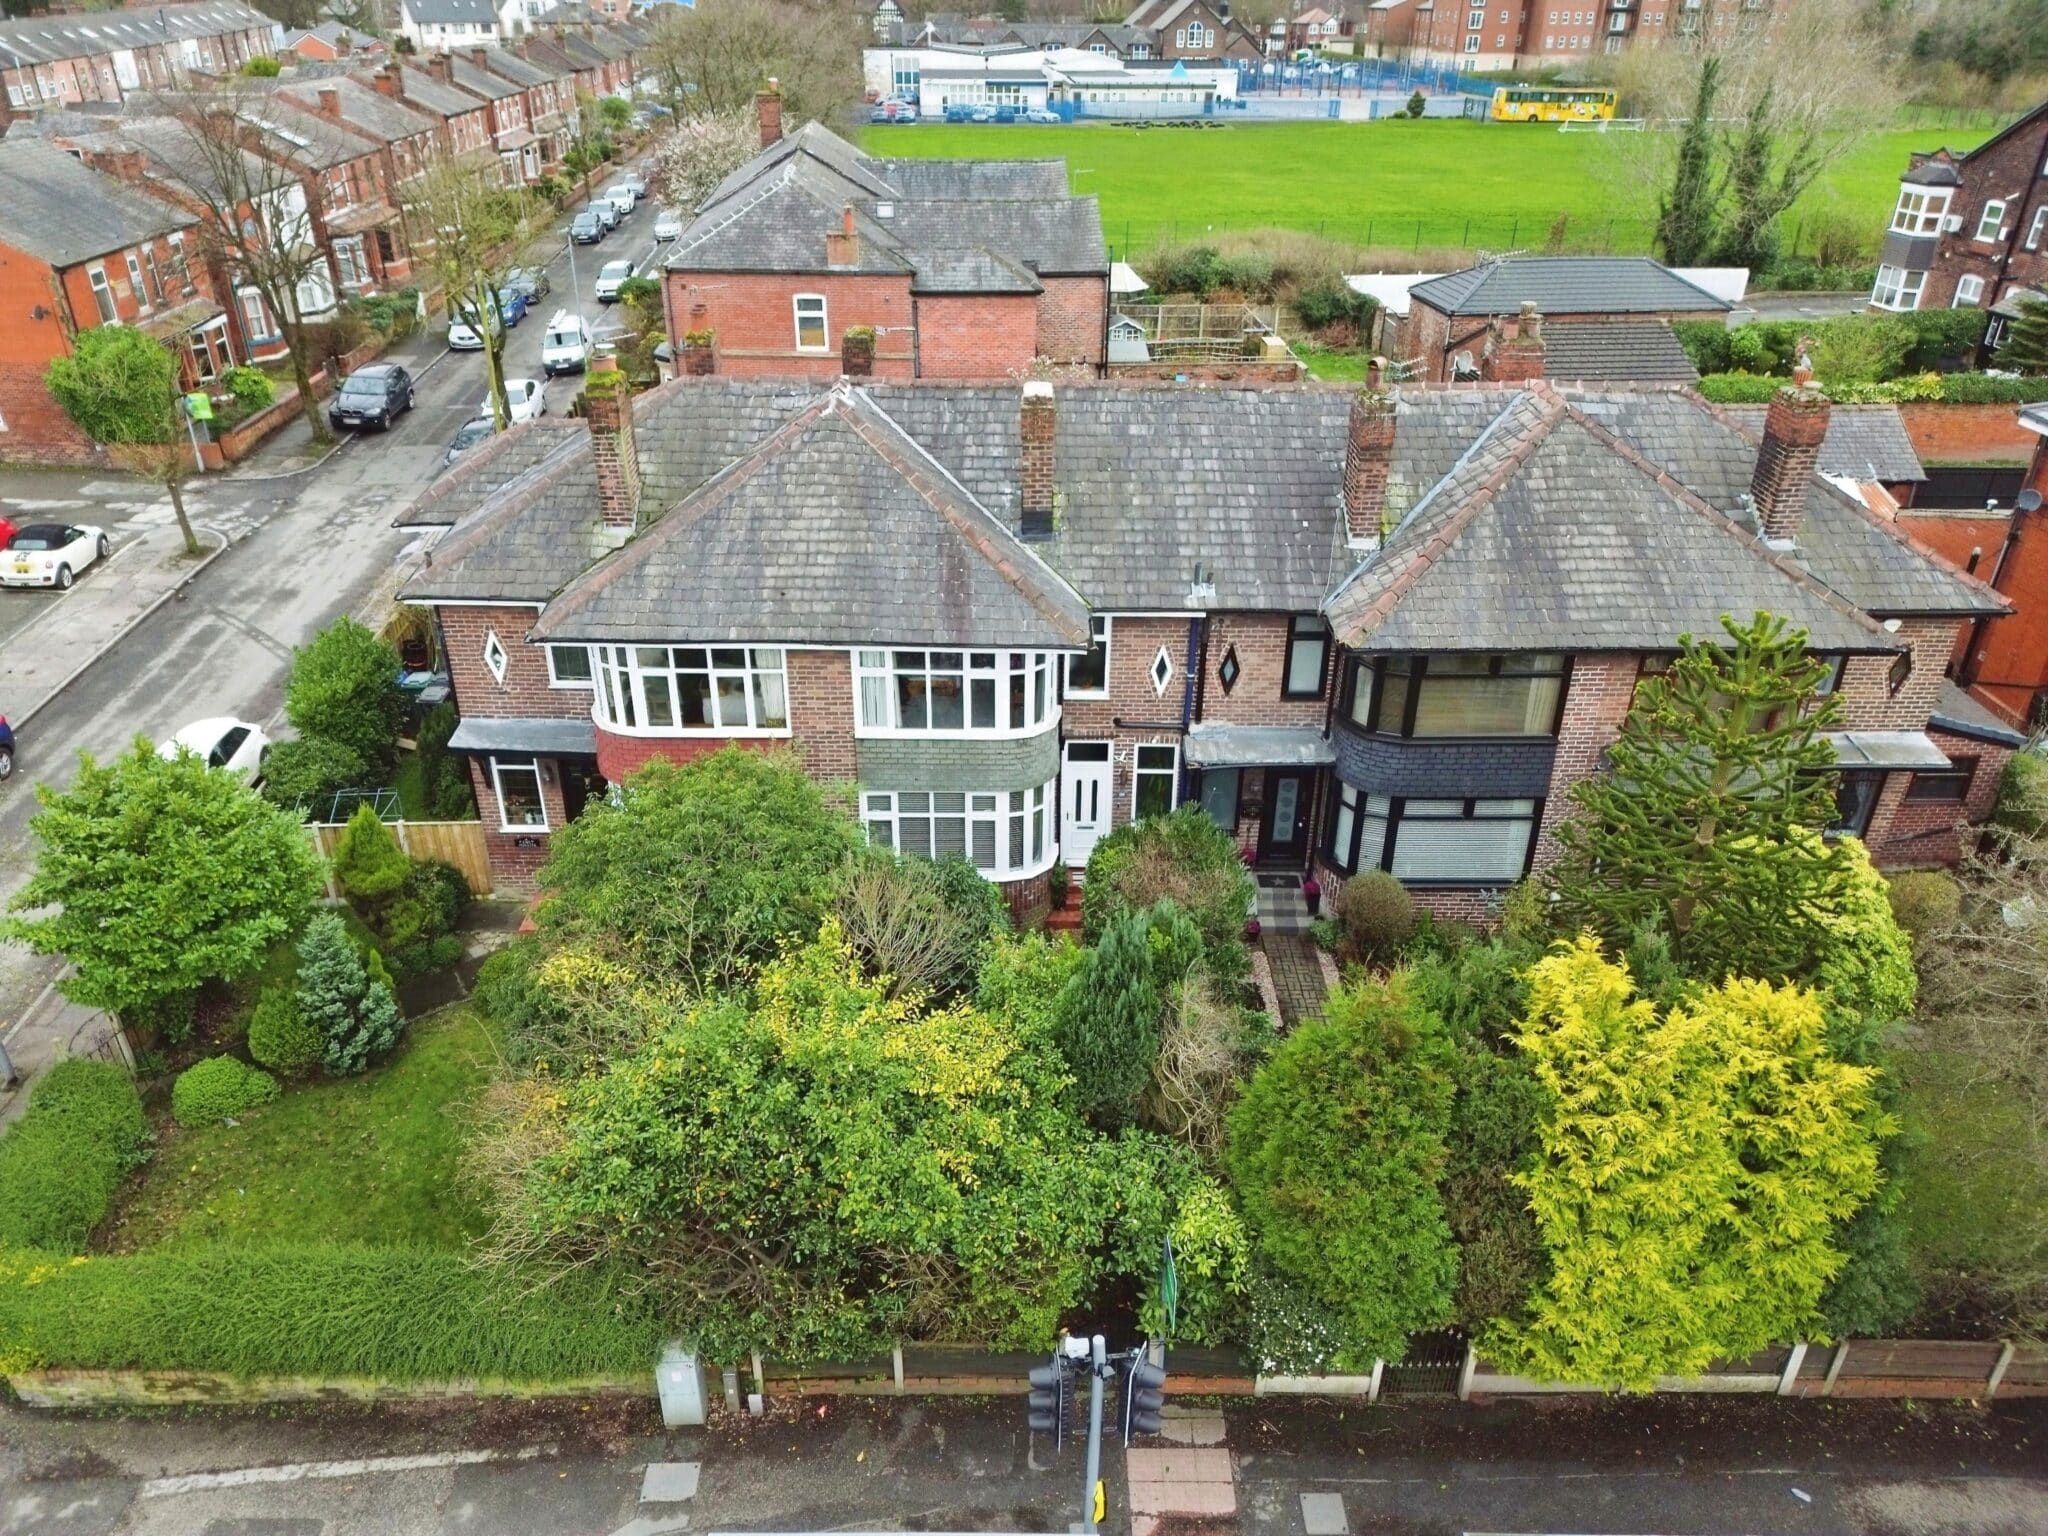 Bury New Road, Whitefield, Manchester, Manchester, M45 6AB